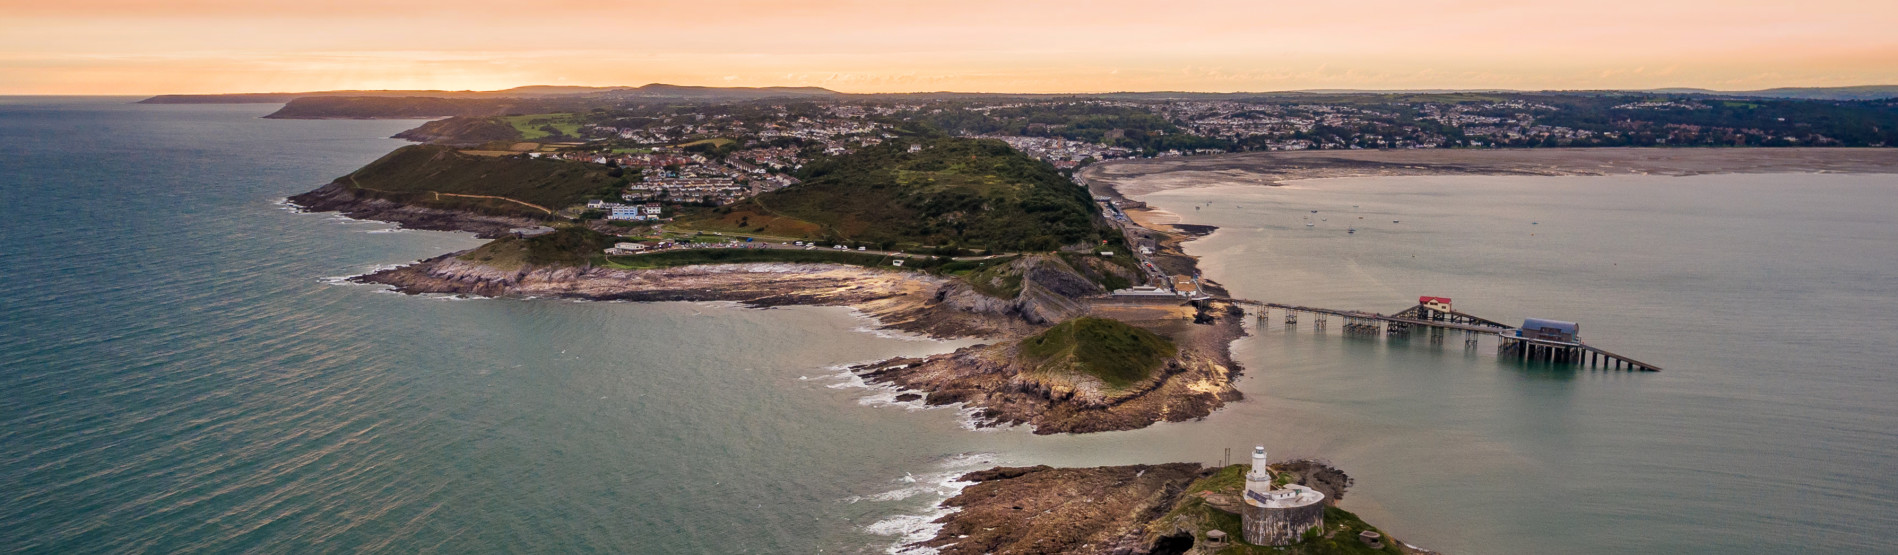 Image shows an aerial shot of Mumbles headland and lighthouse.